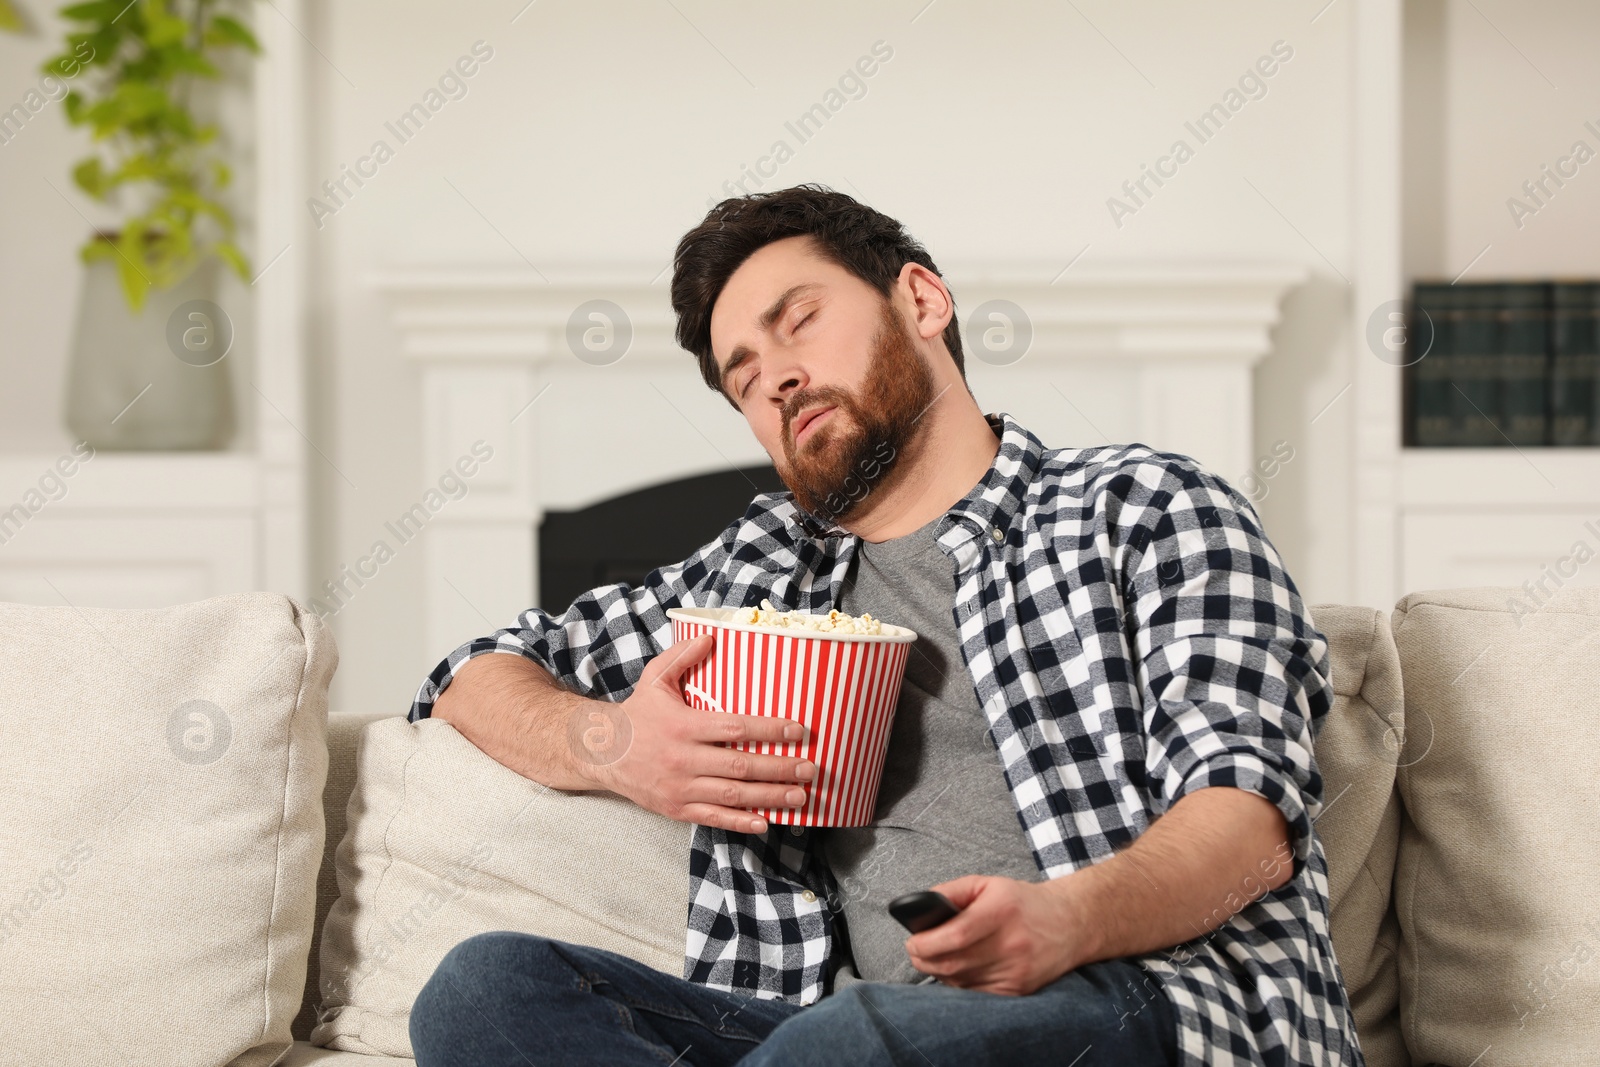 Photo of Man sleeping while watching TV with popcorn on sofa indoors